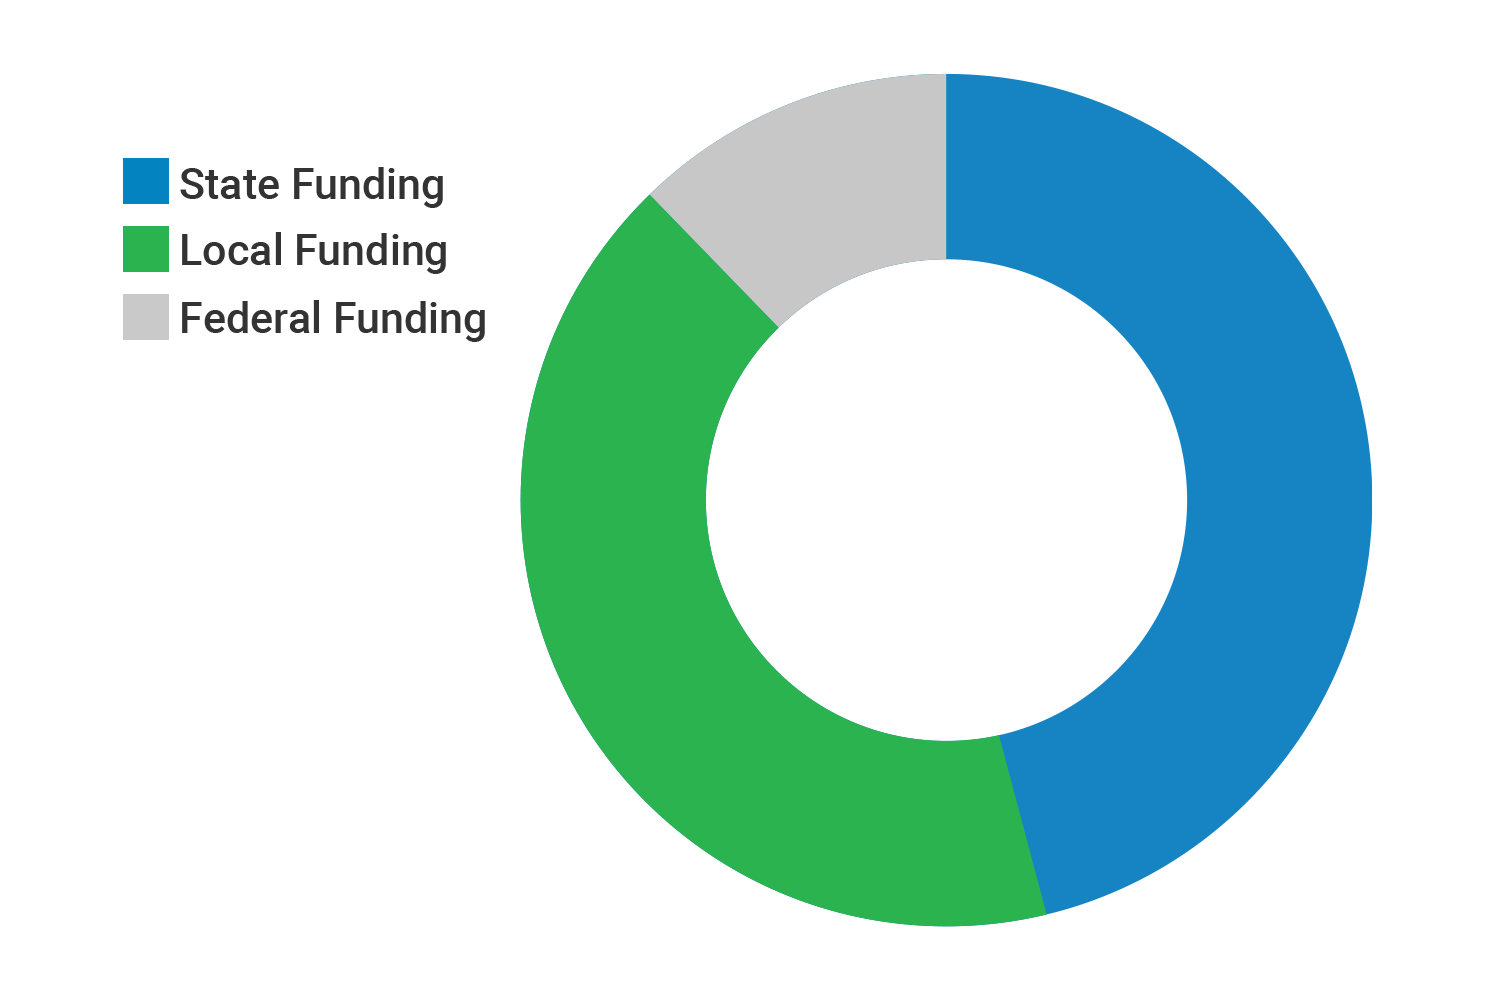 Graph representing state funding of 47 percent, local funding of 43%, and federal government funding of 10%